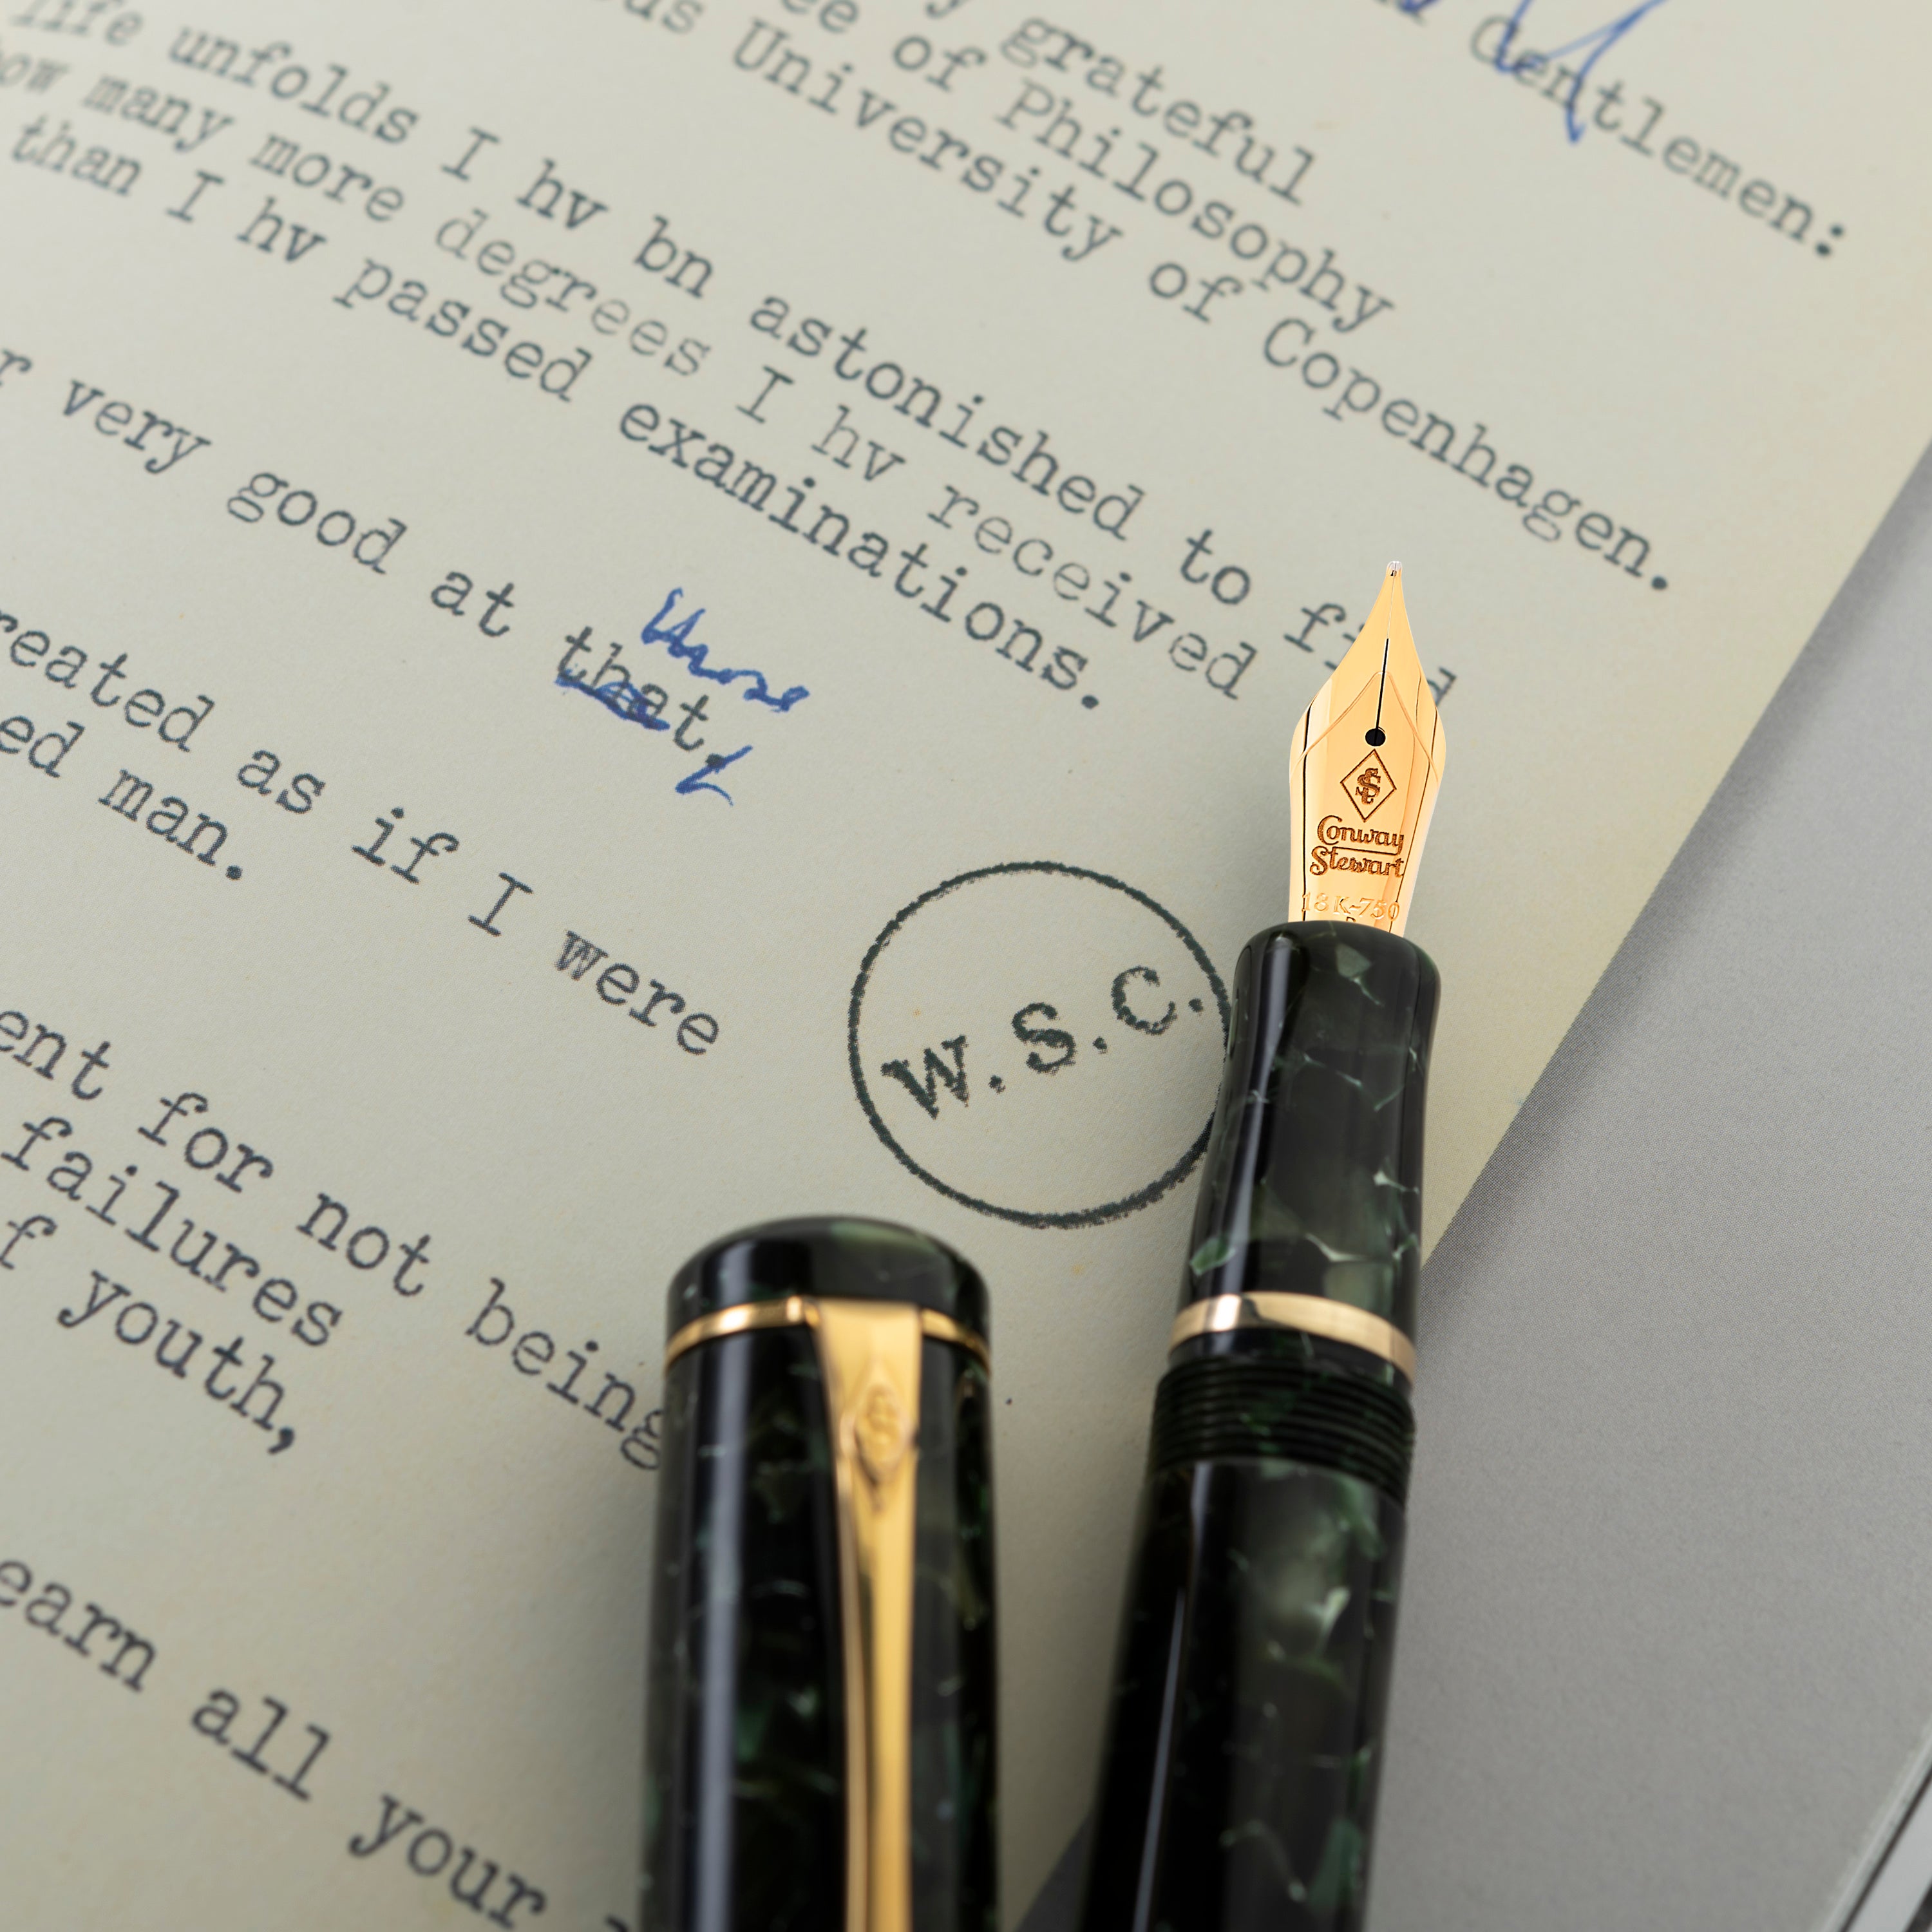 A writing instrument with a classic design, featuring a green barrel and gold accents, named after Winston Churchill